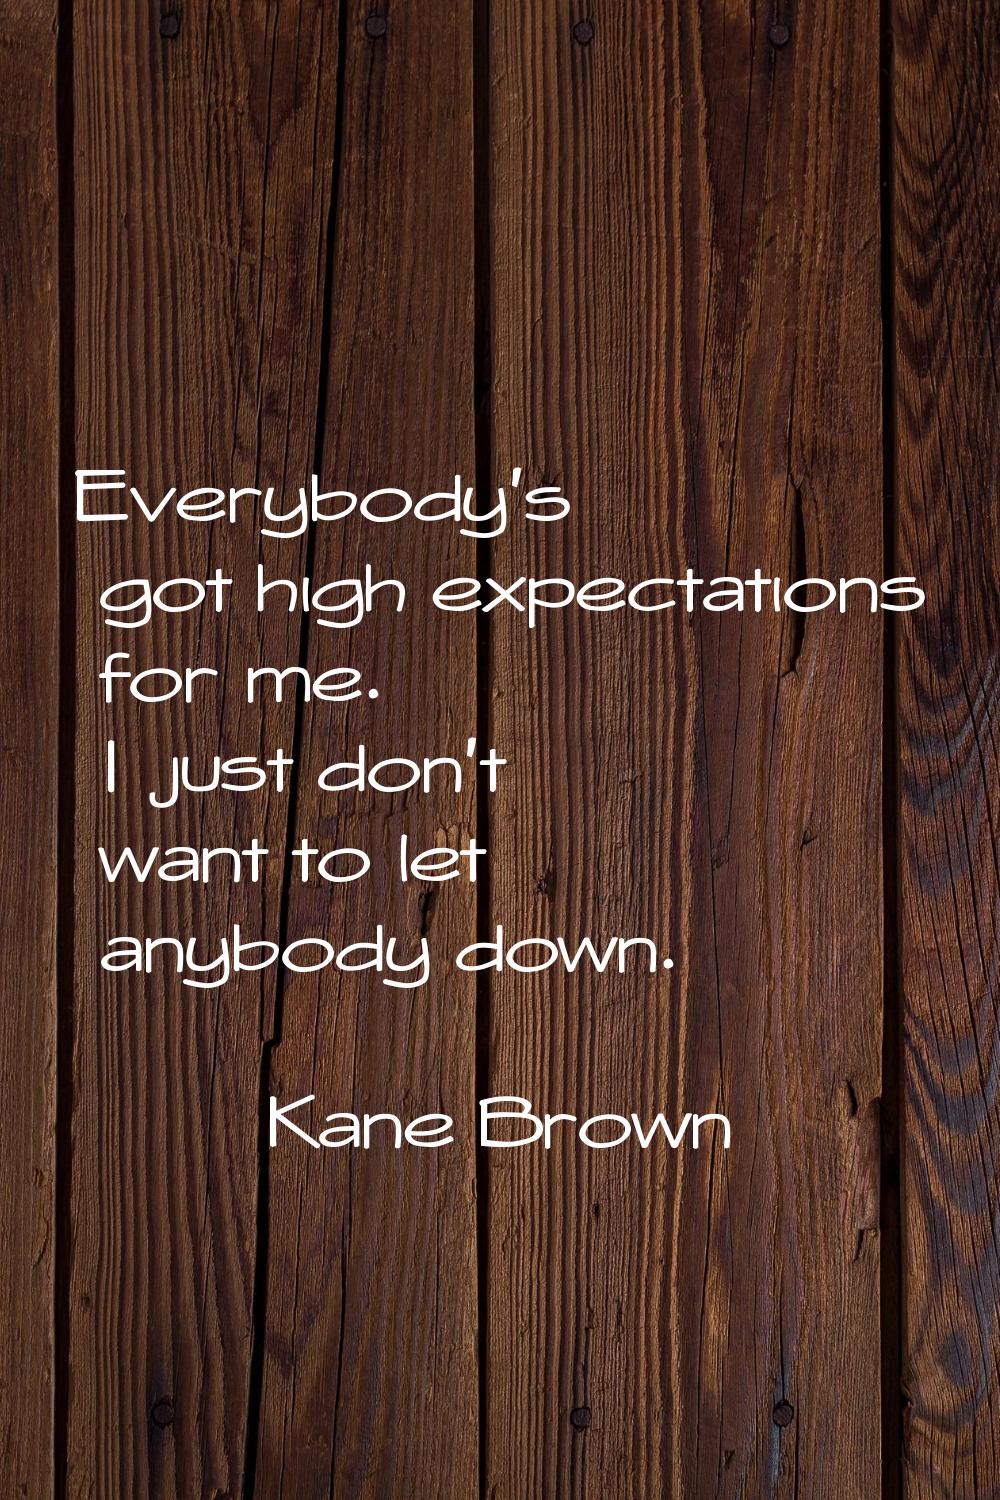 Everybody's got high expectations for me. I just don't want to let anybody down.